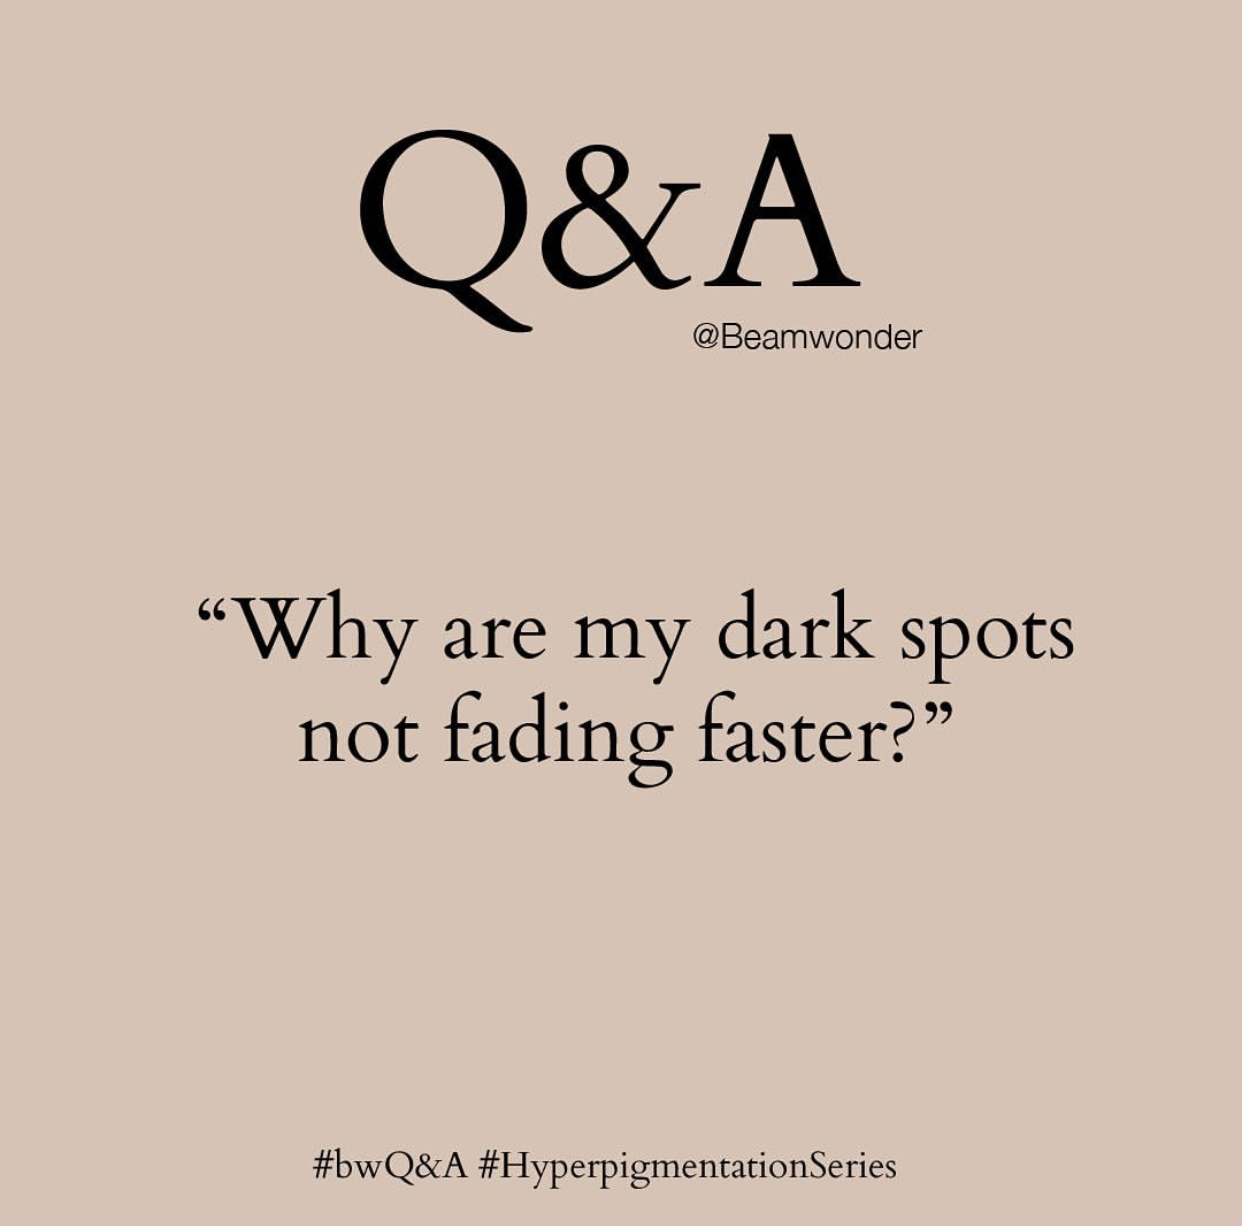 Q&A: Why are my dark spots not fading faster?